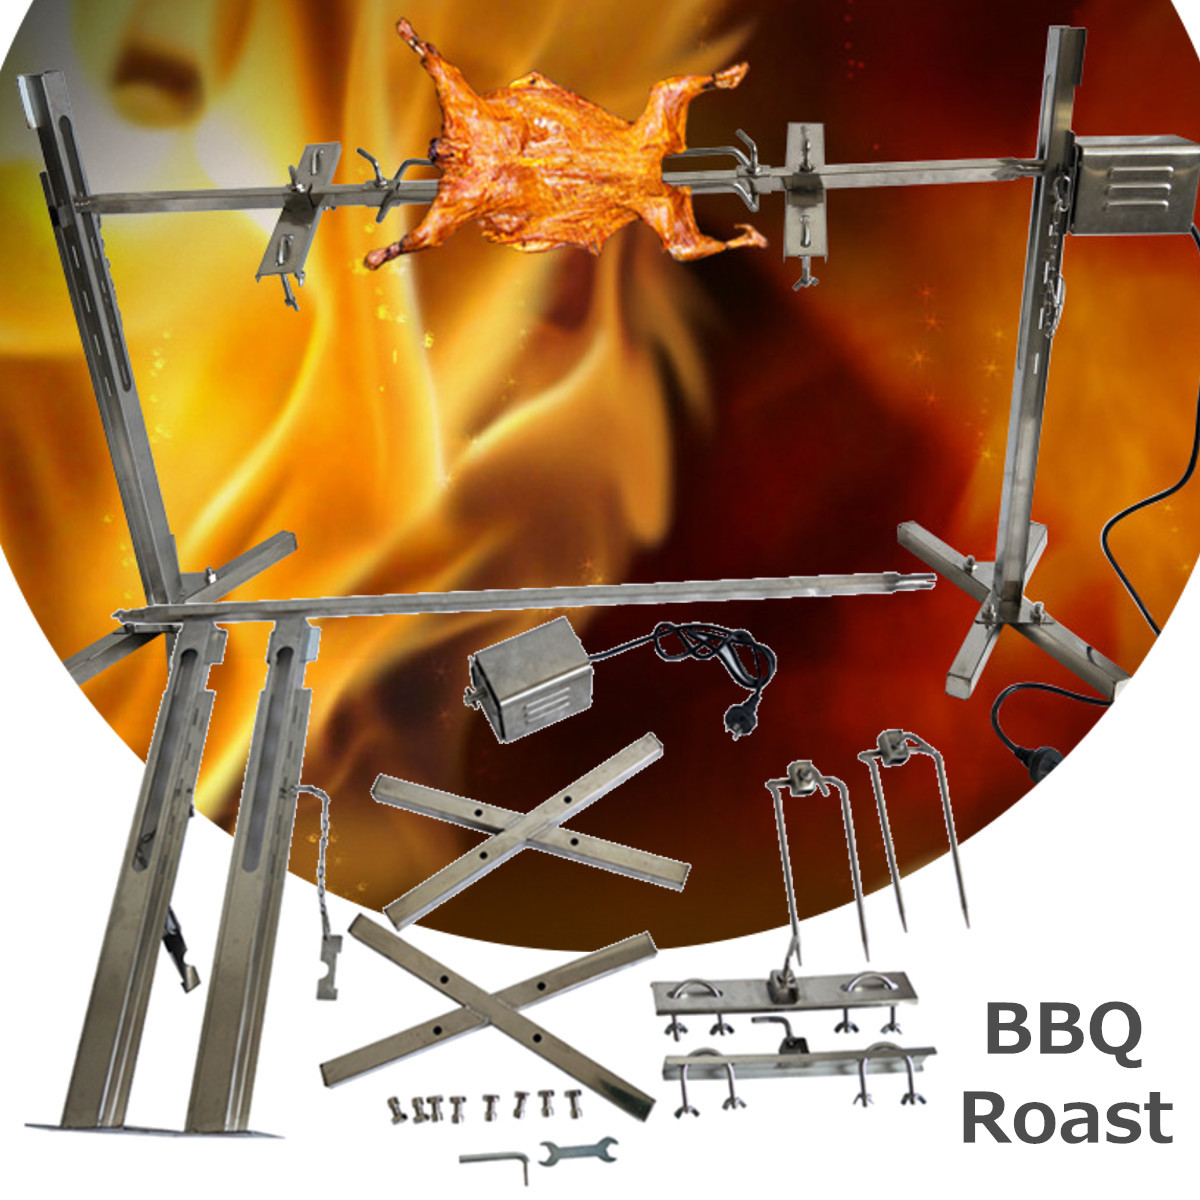 Large-Grill-Rotisserie-Spit-Roaster-Rod-Charcoal-BBQ-Pig-Chicken-15W-Motor-Kit-1336953-1